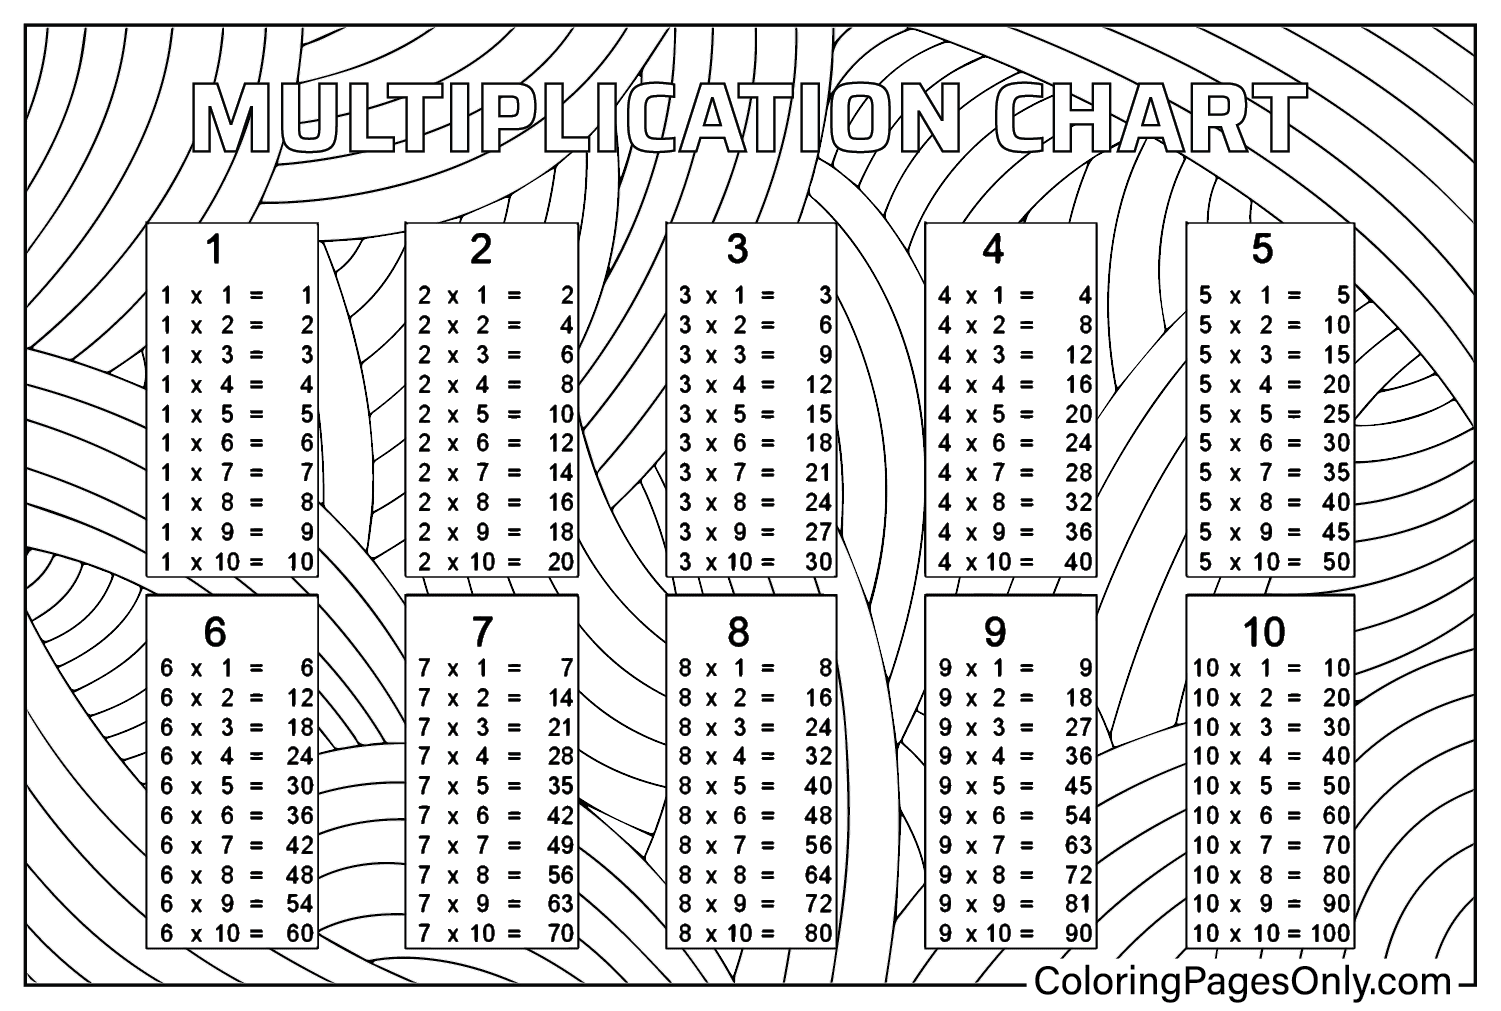 Multiplication Chart Coloring from Multiplication Chart